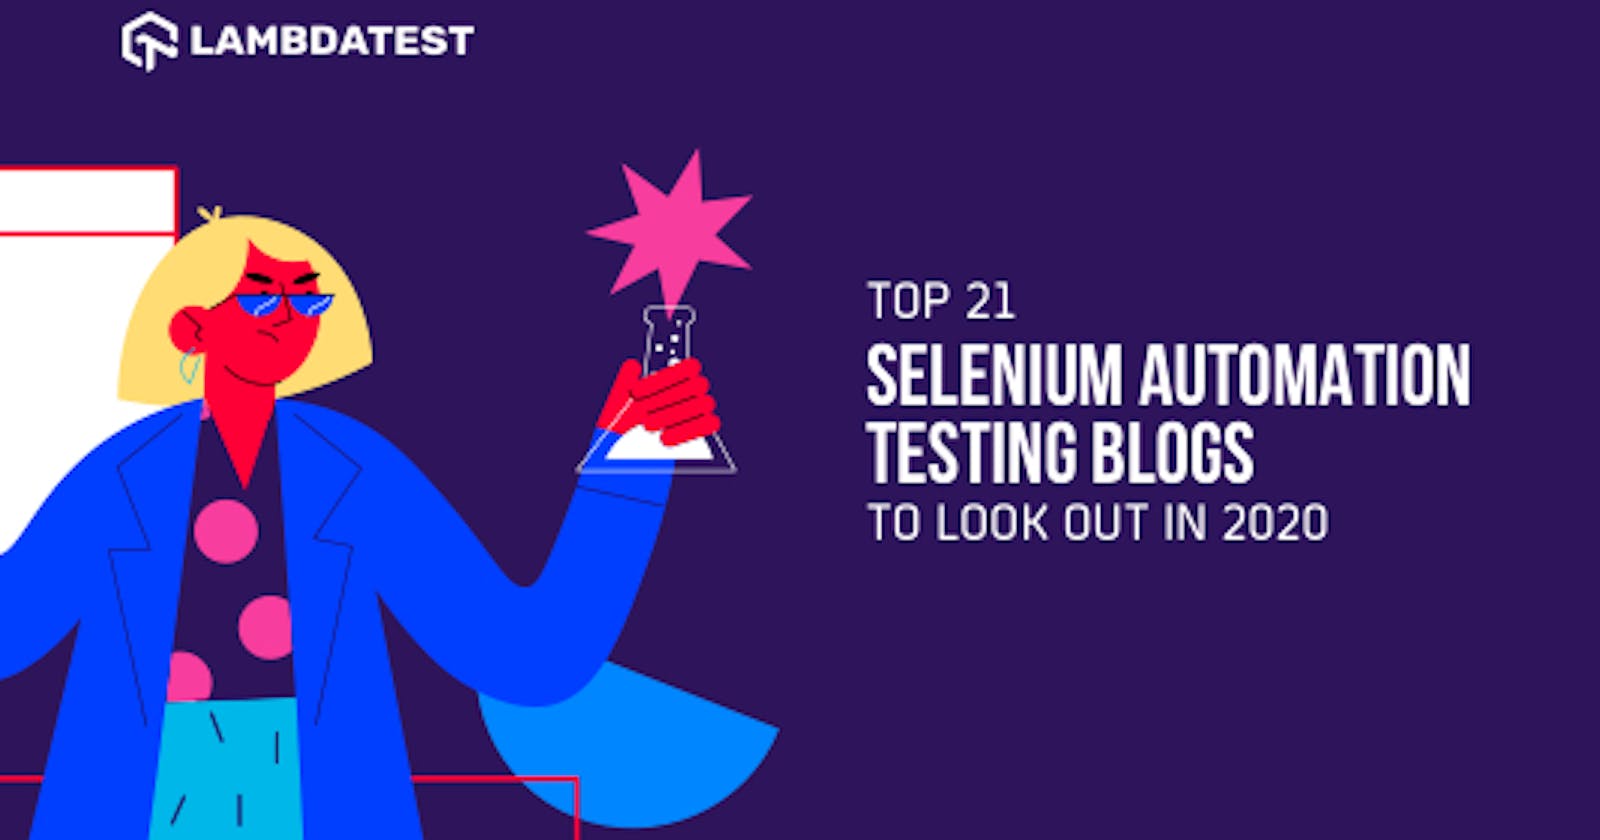 Top 21 Selenium Automation Testing Blogs To Look Out In 2020